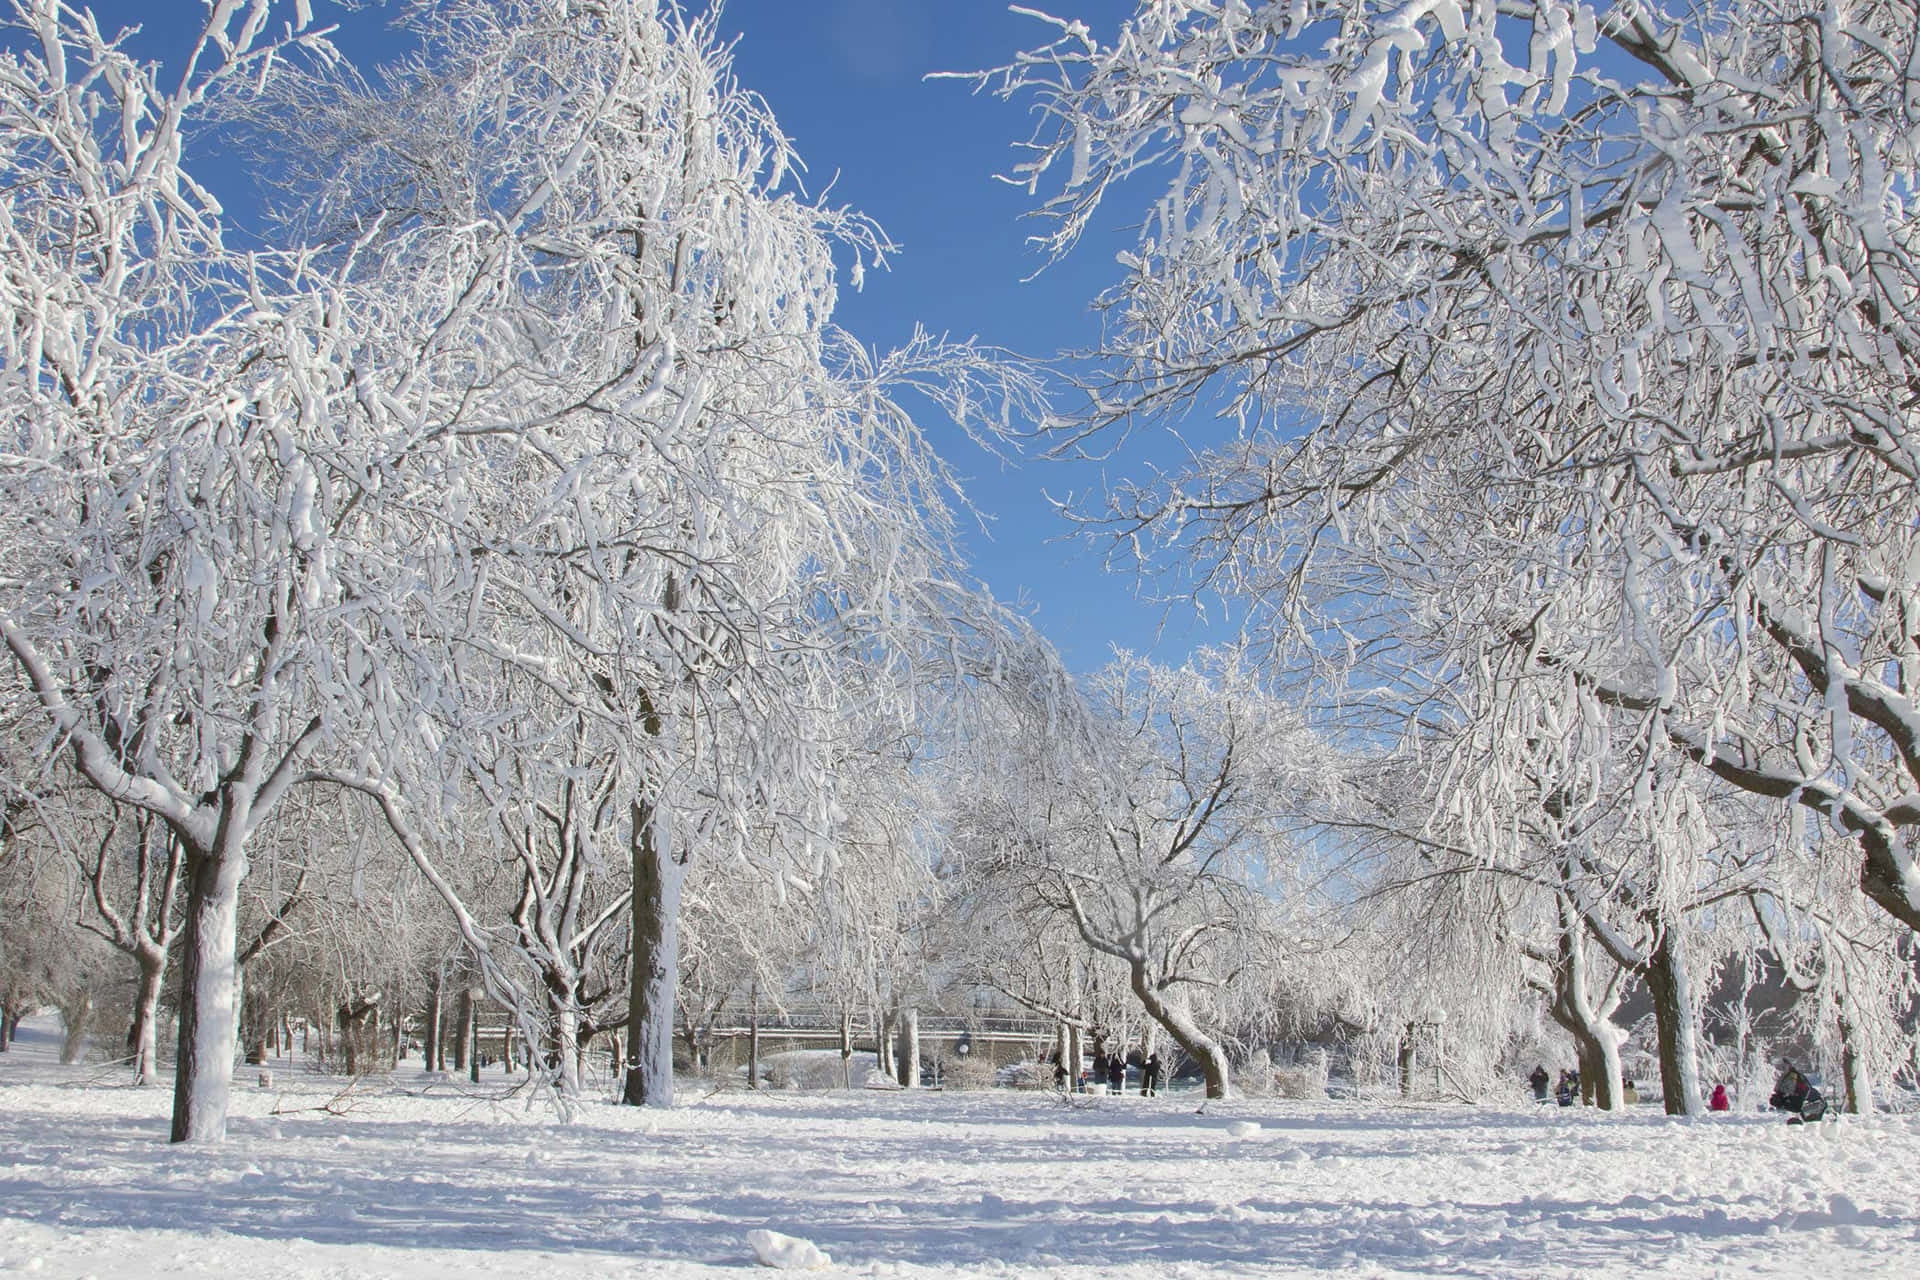 "This winter, enjoy a serene outdoor landscape like no other"